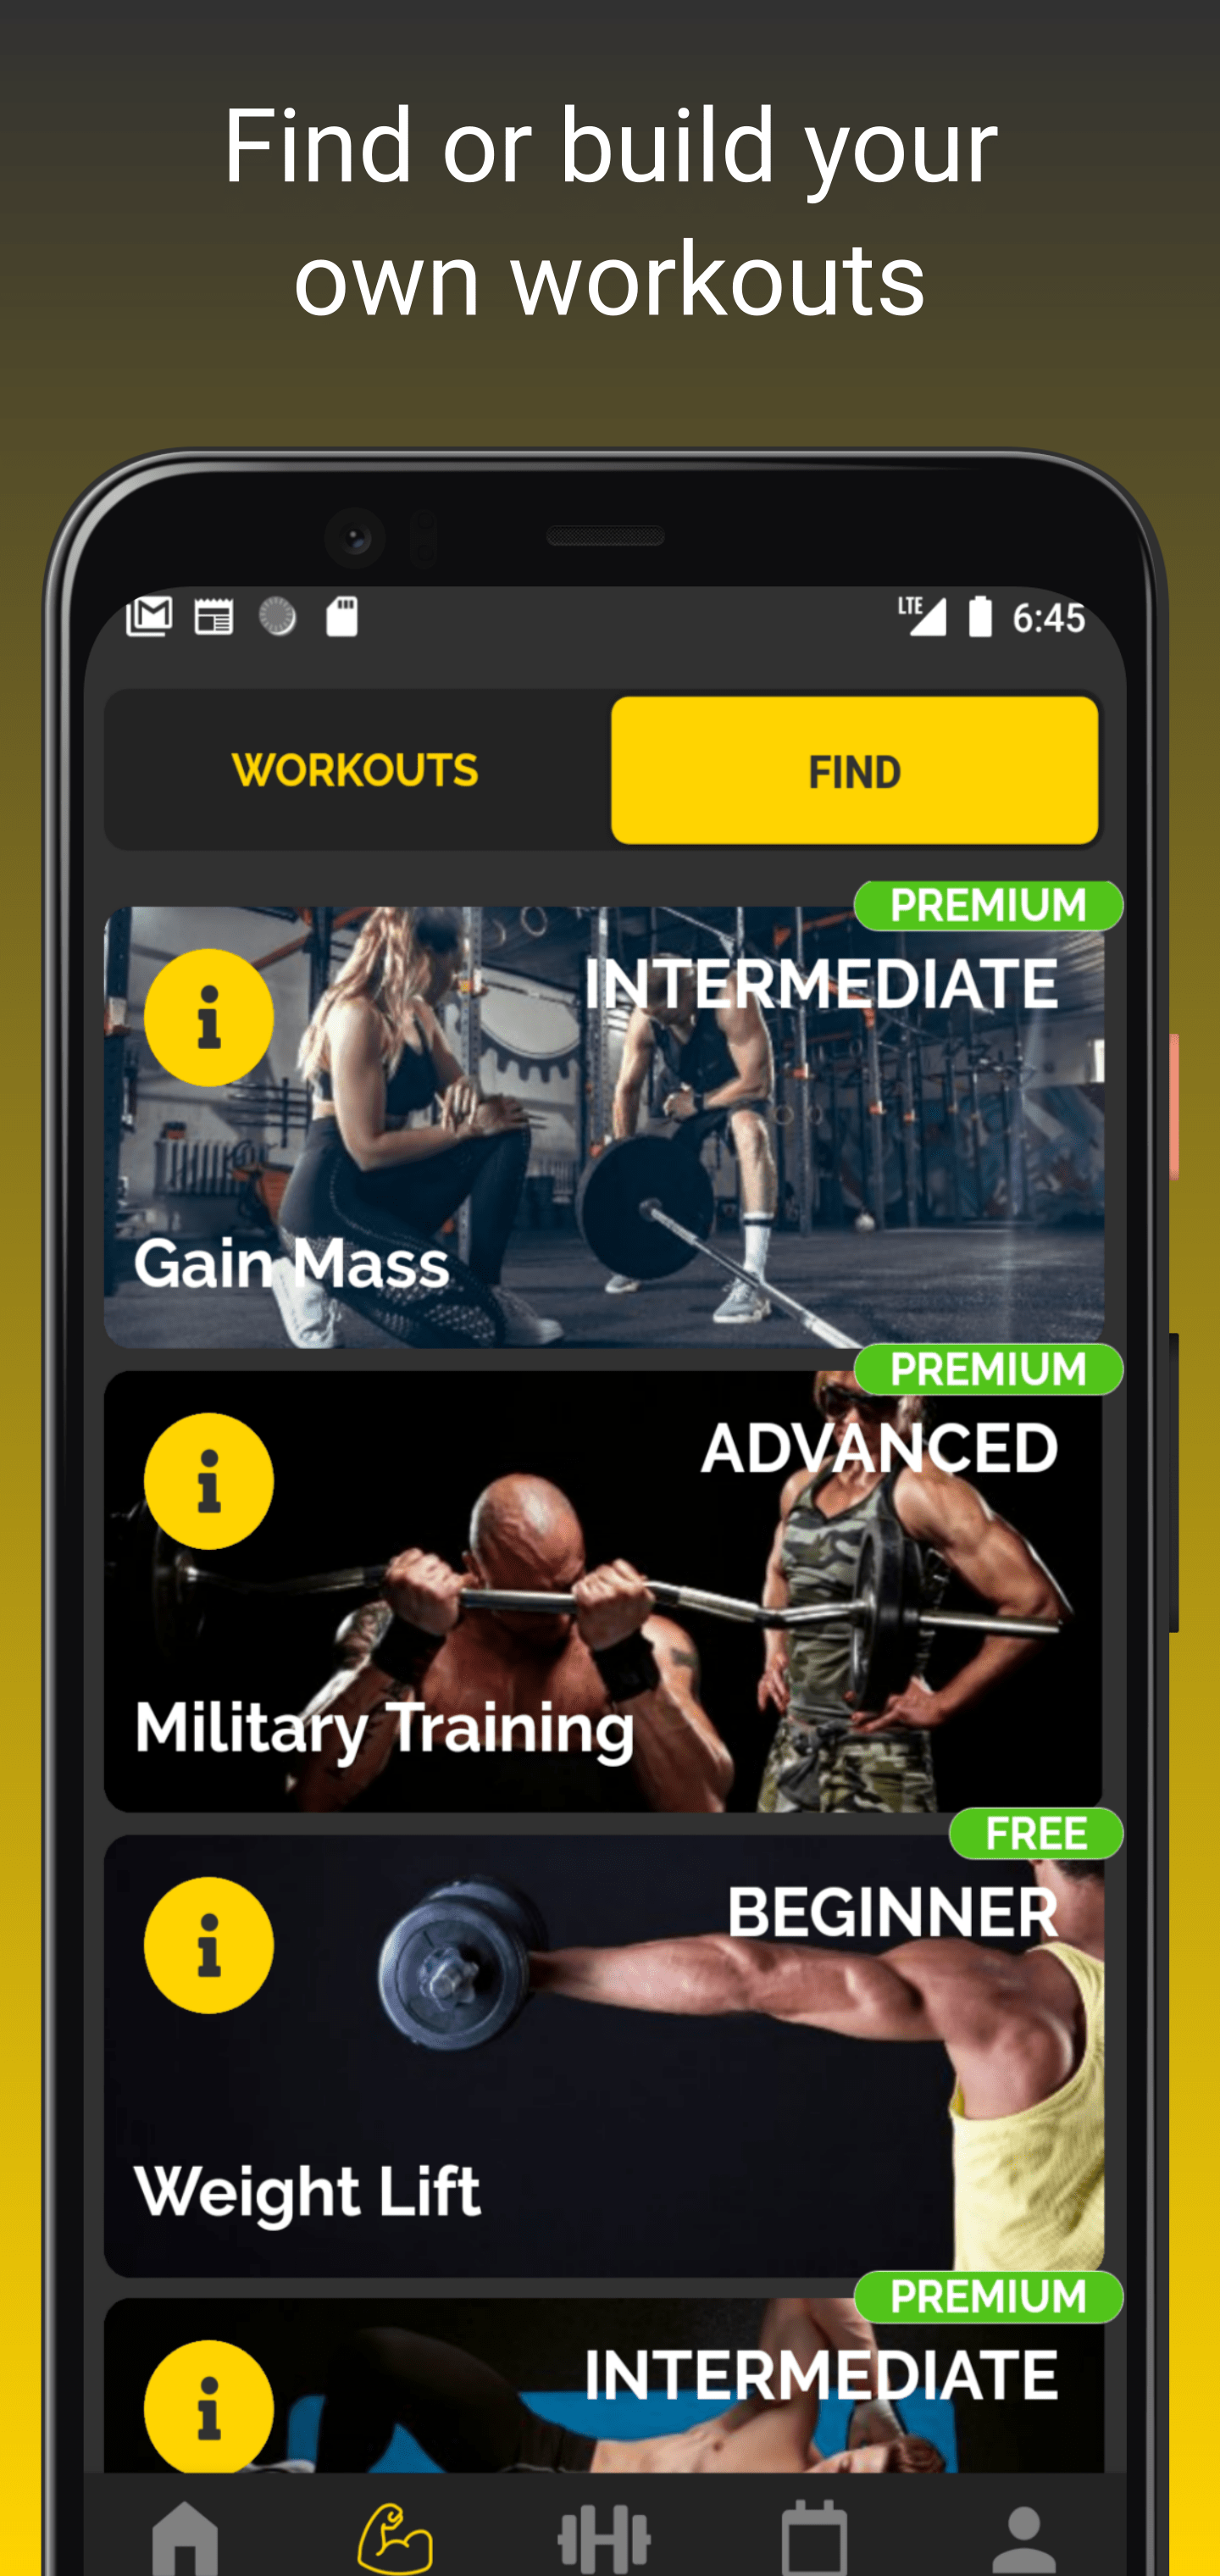 X-ercise - workout plans, gym tracker